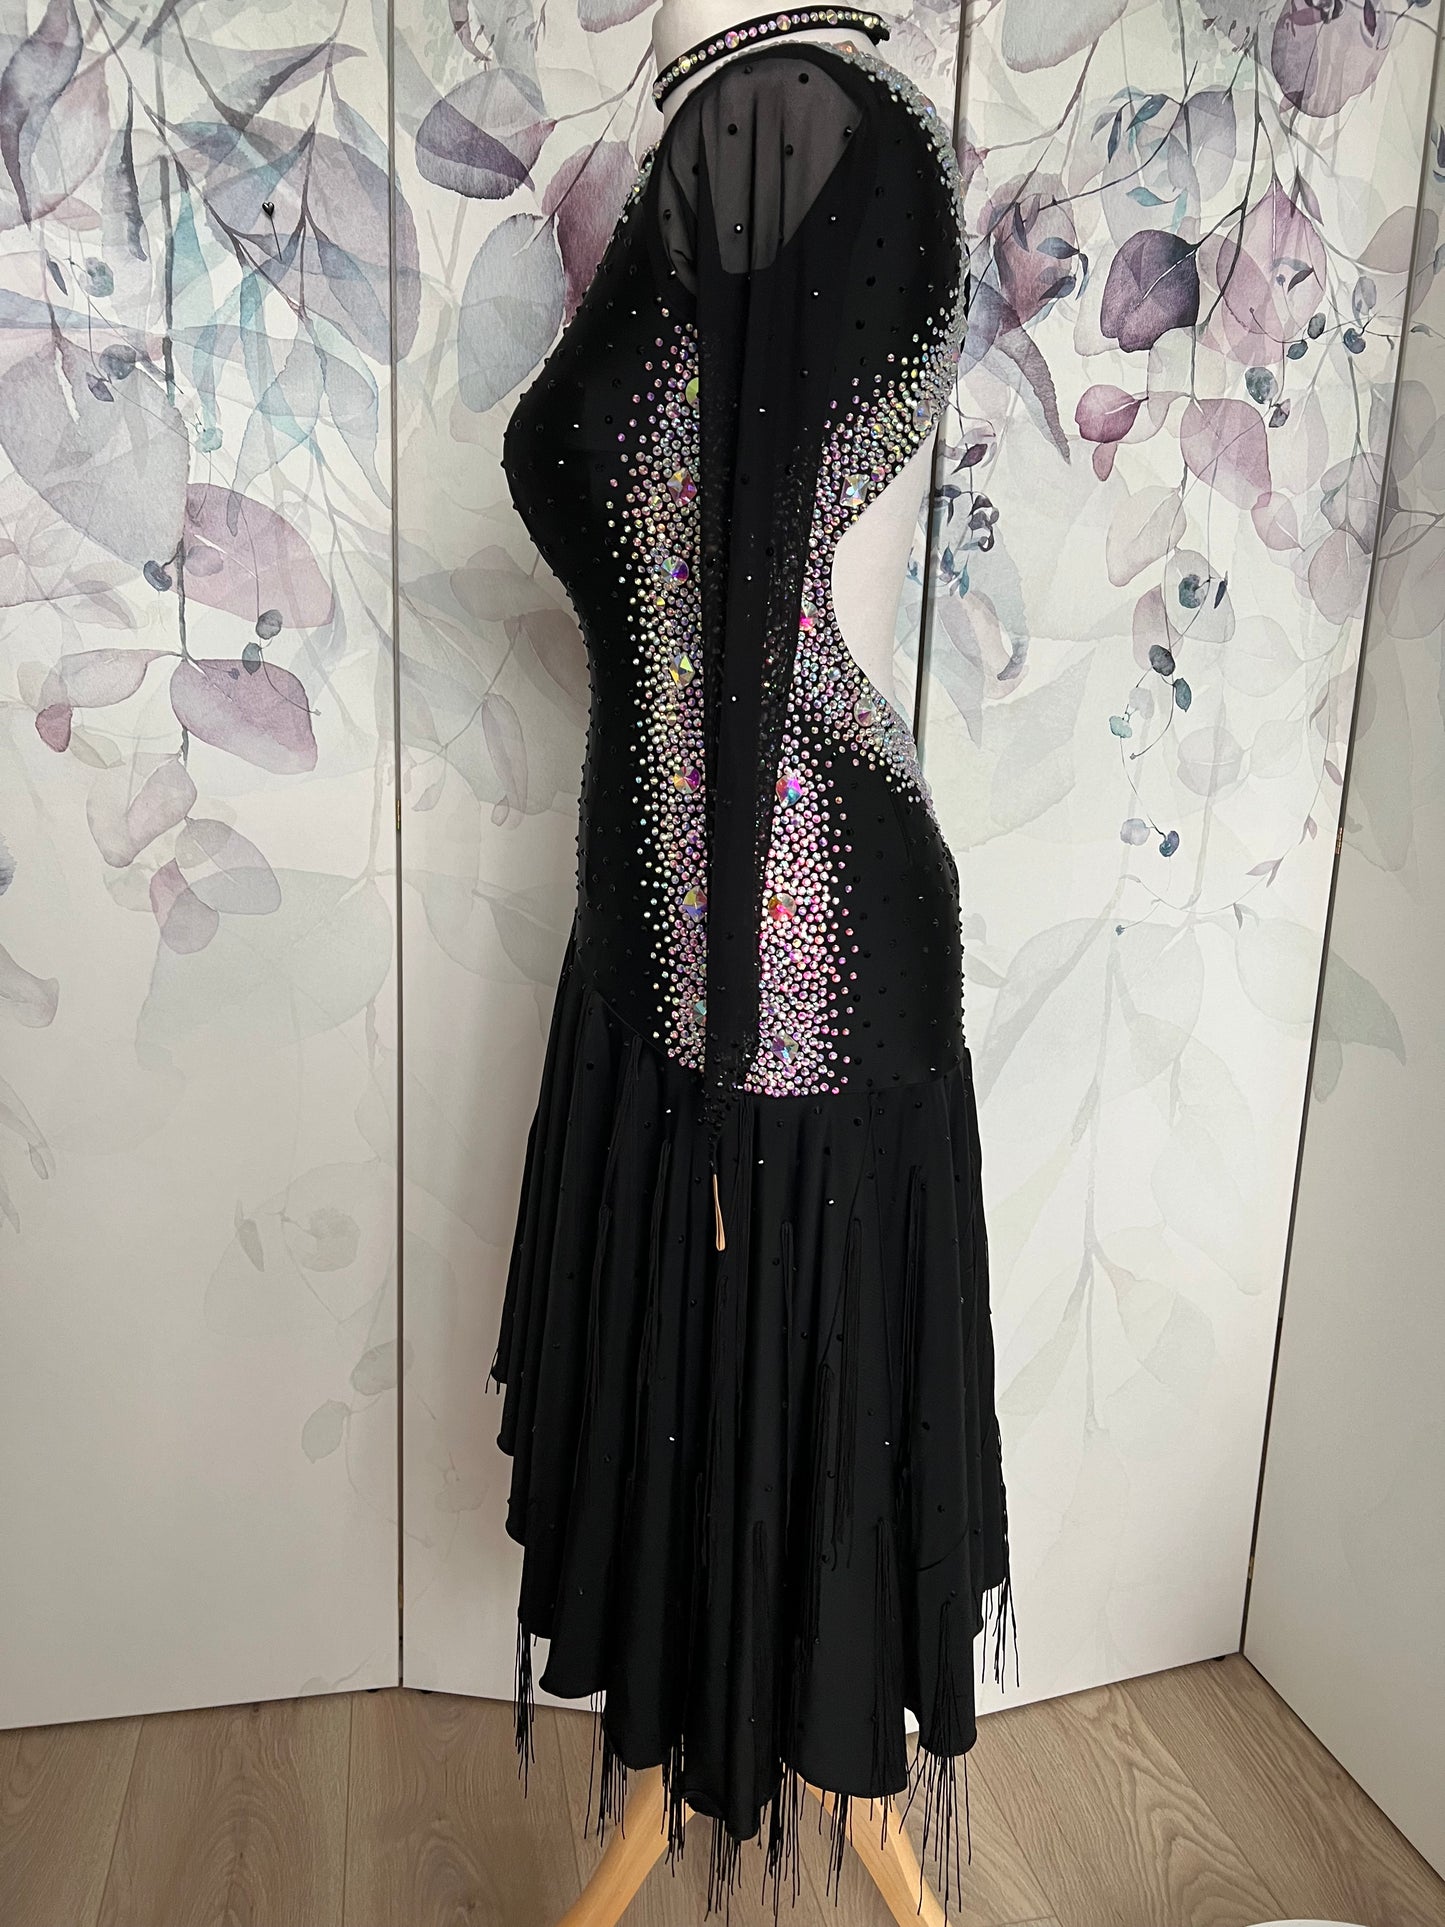 230 Black Latin dress. Stoning in AB to the sides back and back detailing. Fringe & stone detail to the handkerchief skirt